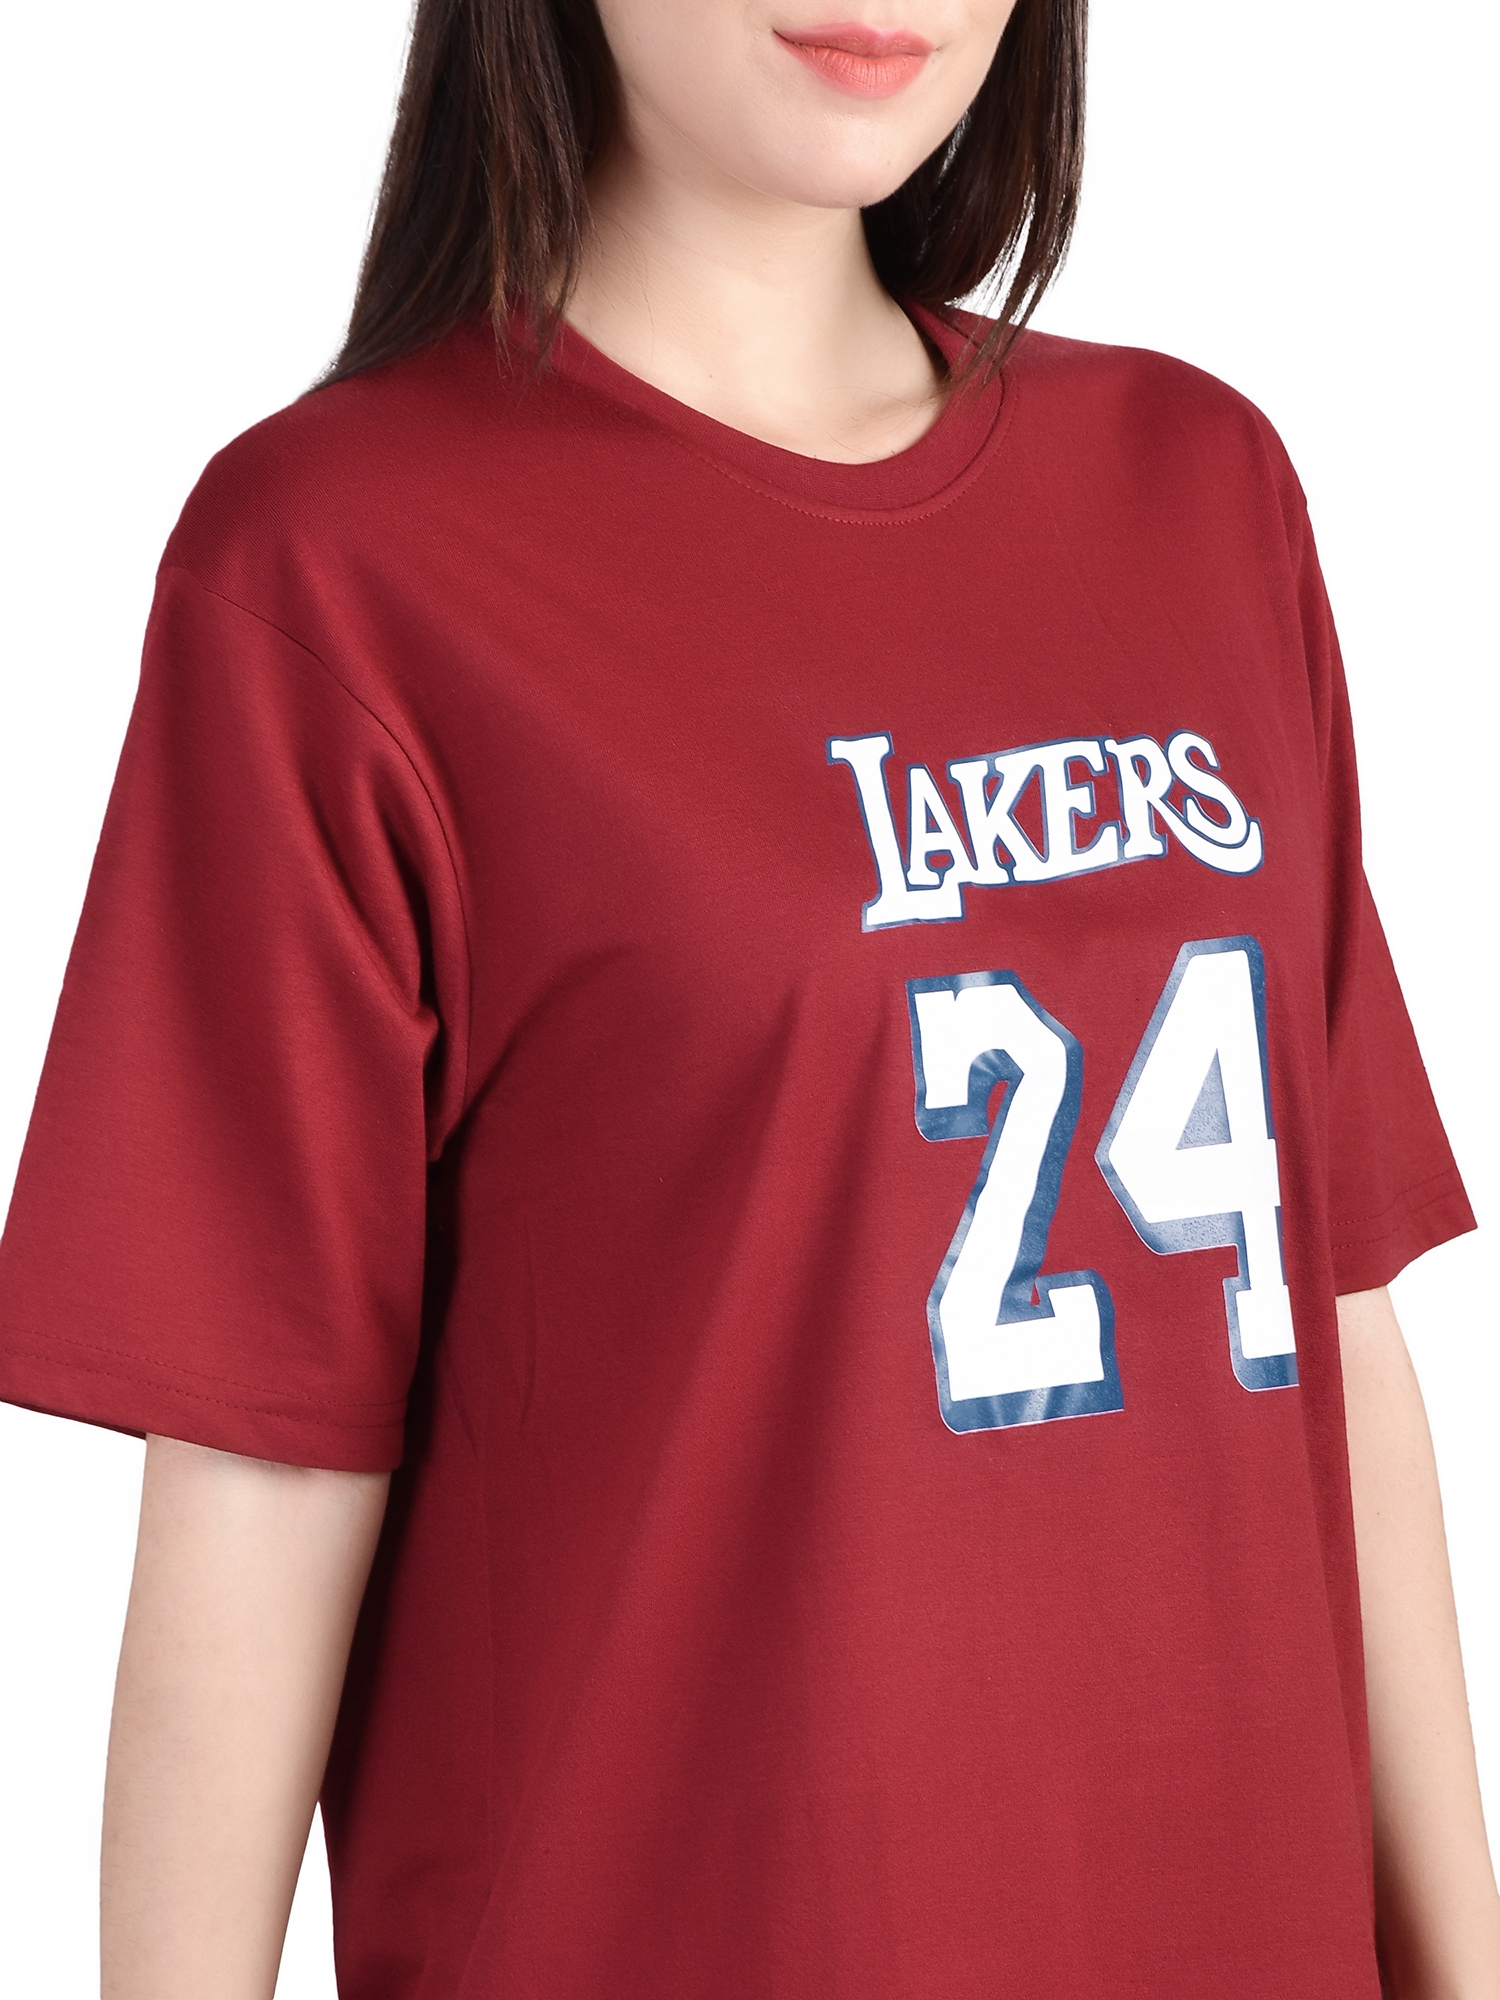 Lakers : Quirky Printed Oversized Women's Tees In Maroon Color